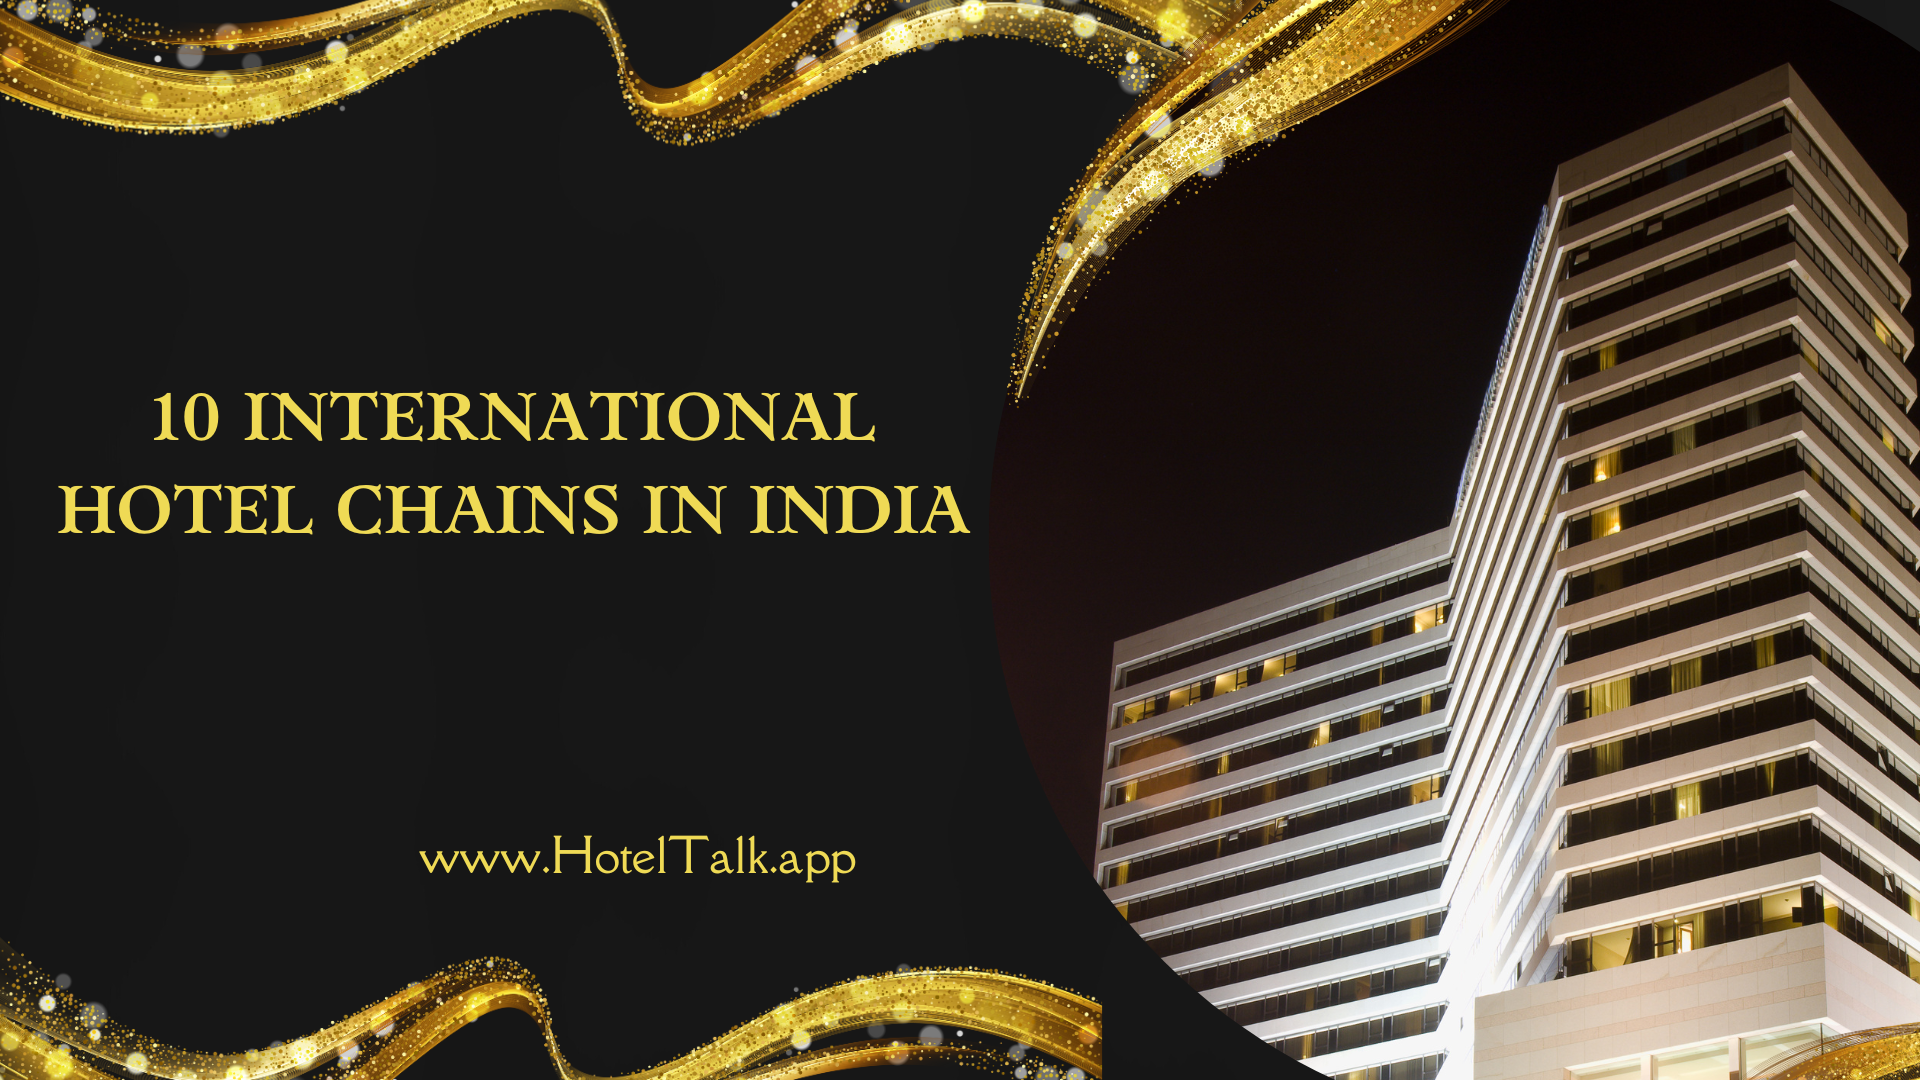 10 International Hotel Chains In India